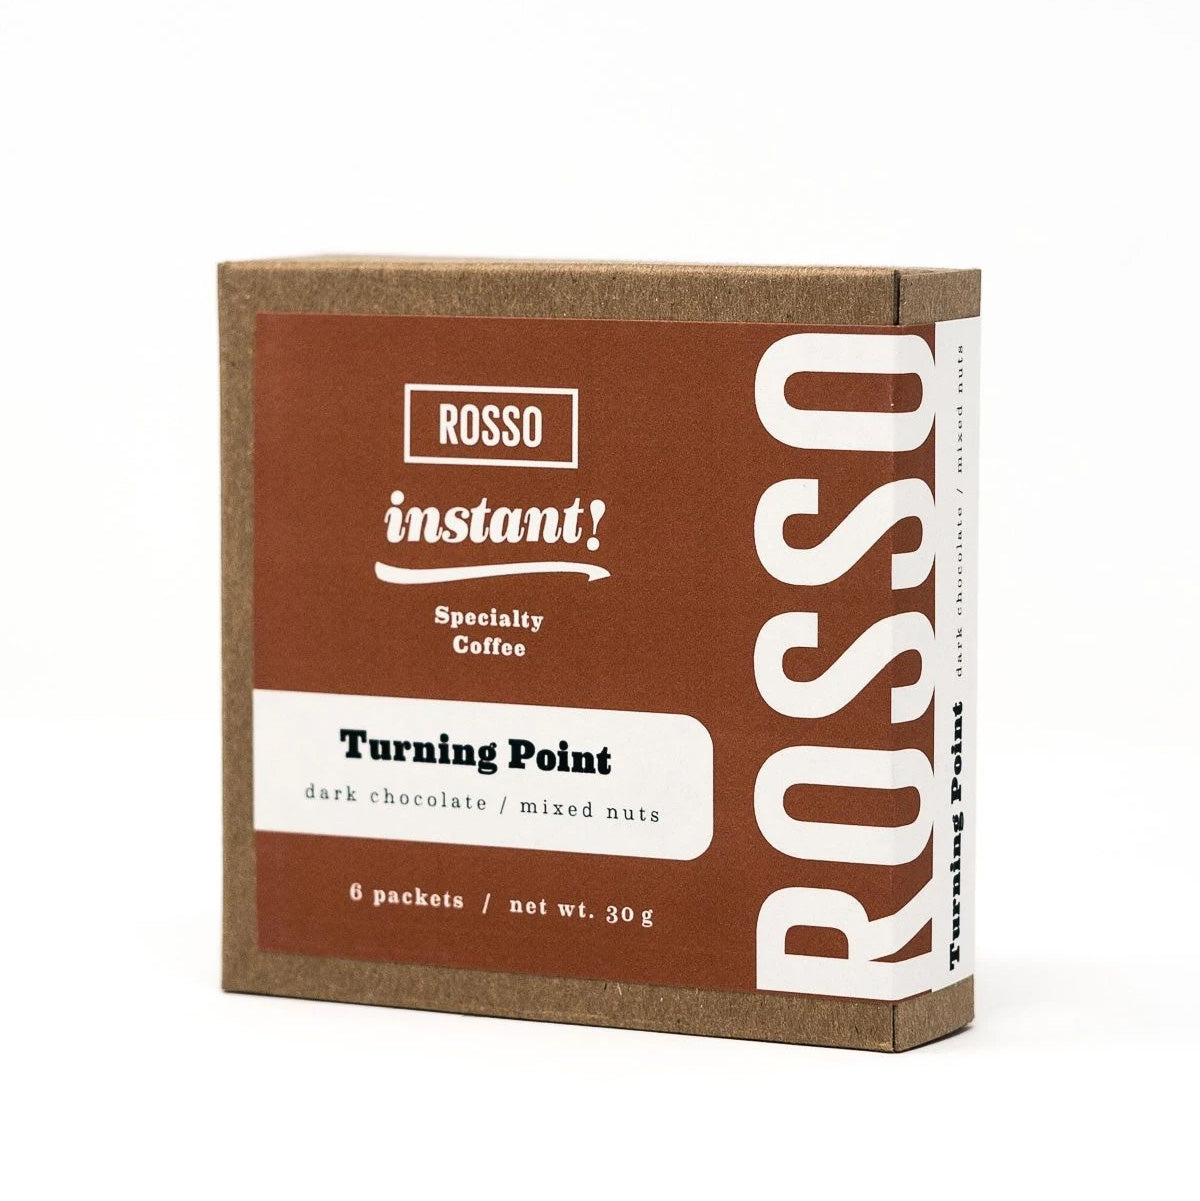 Rosso - Instant! Turning Point (6-pack)